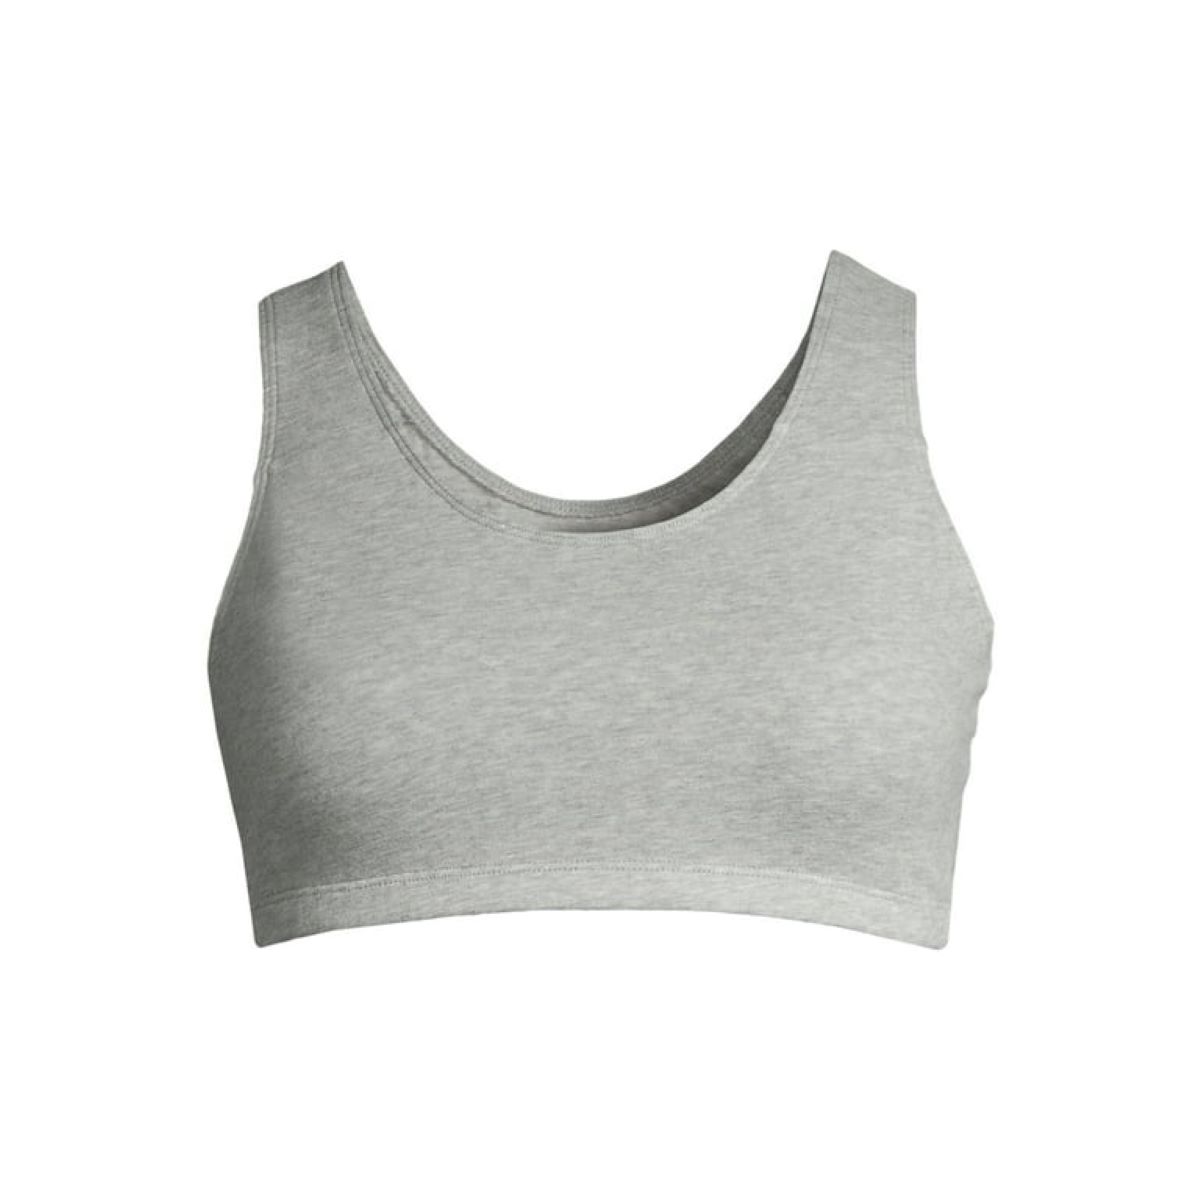 Sports Bra Manufacturers in Barbados